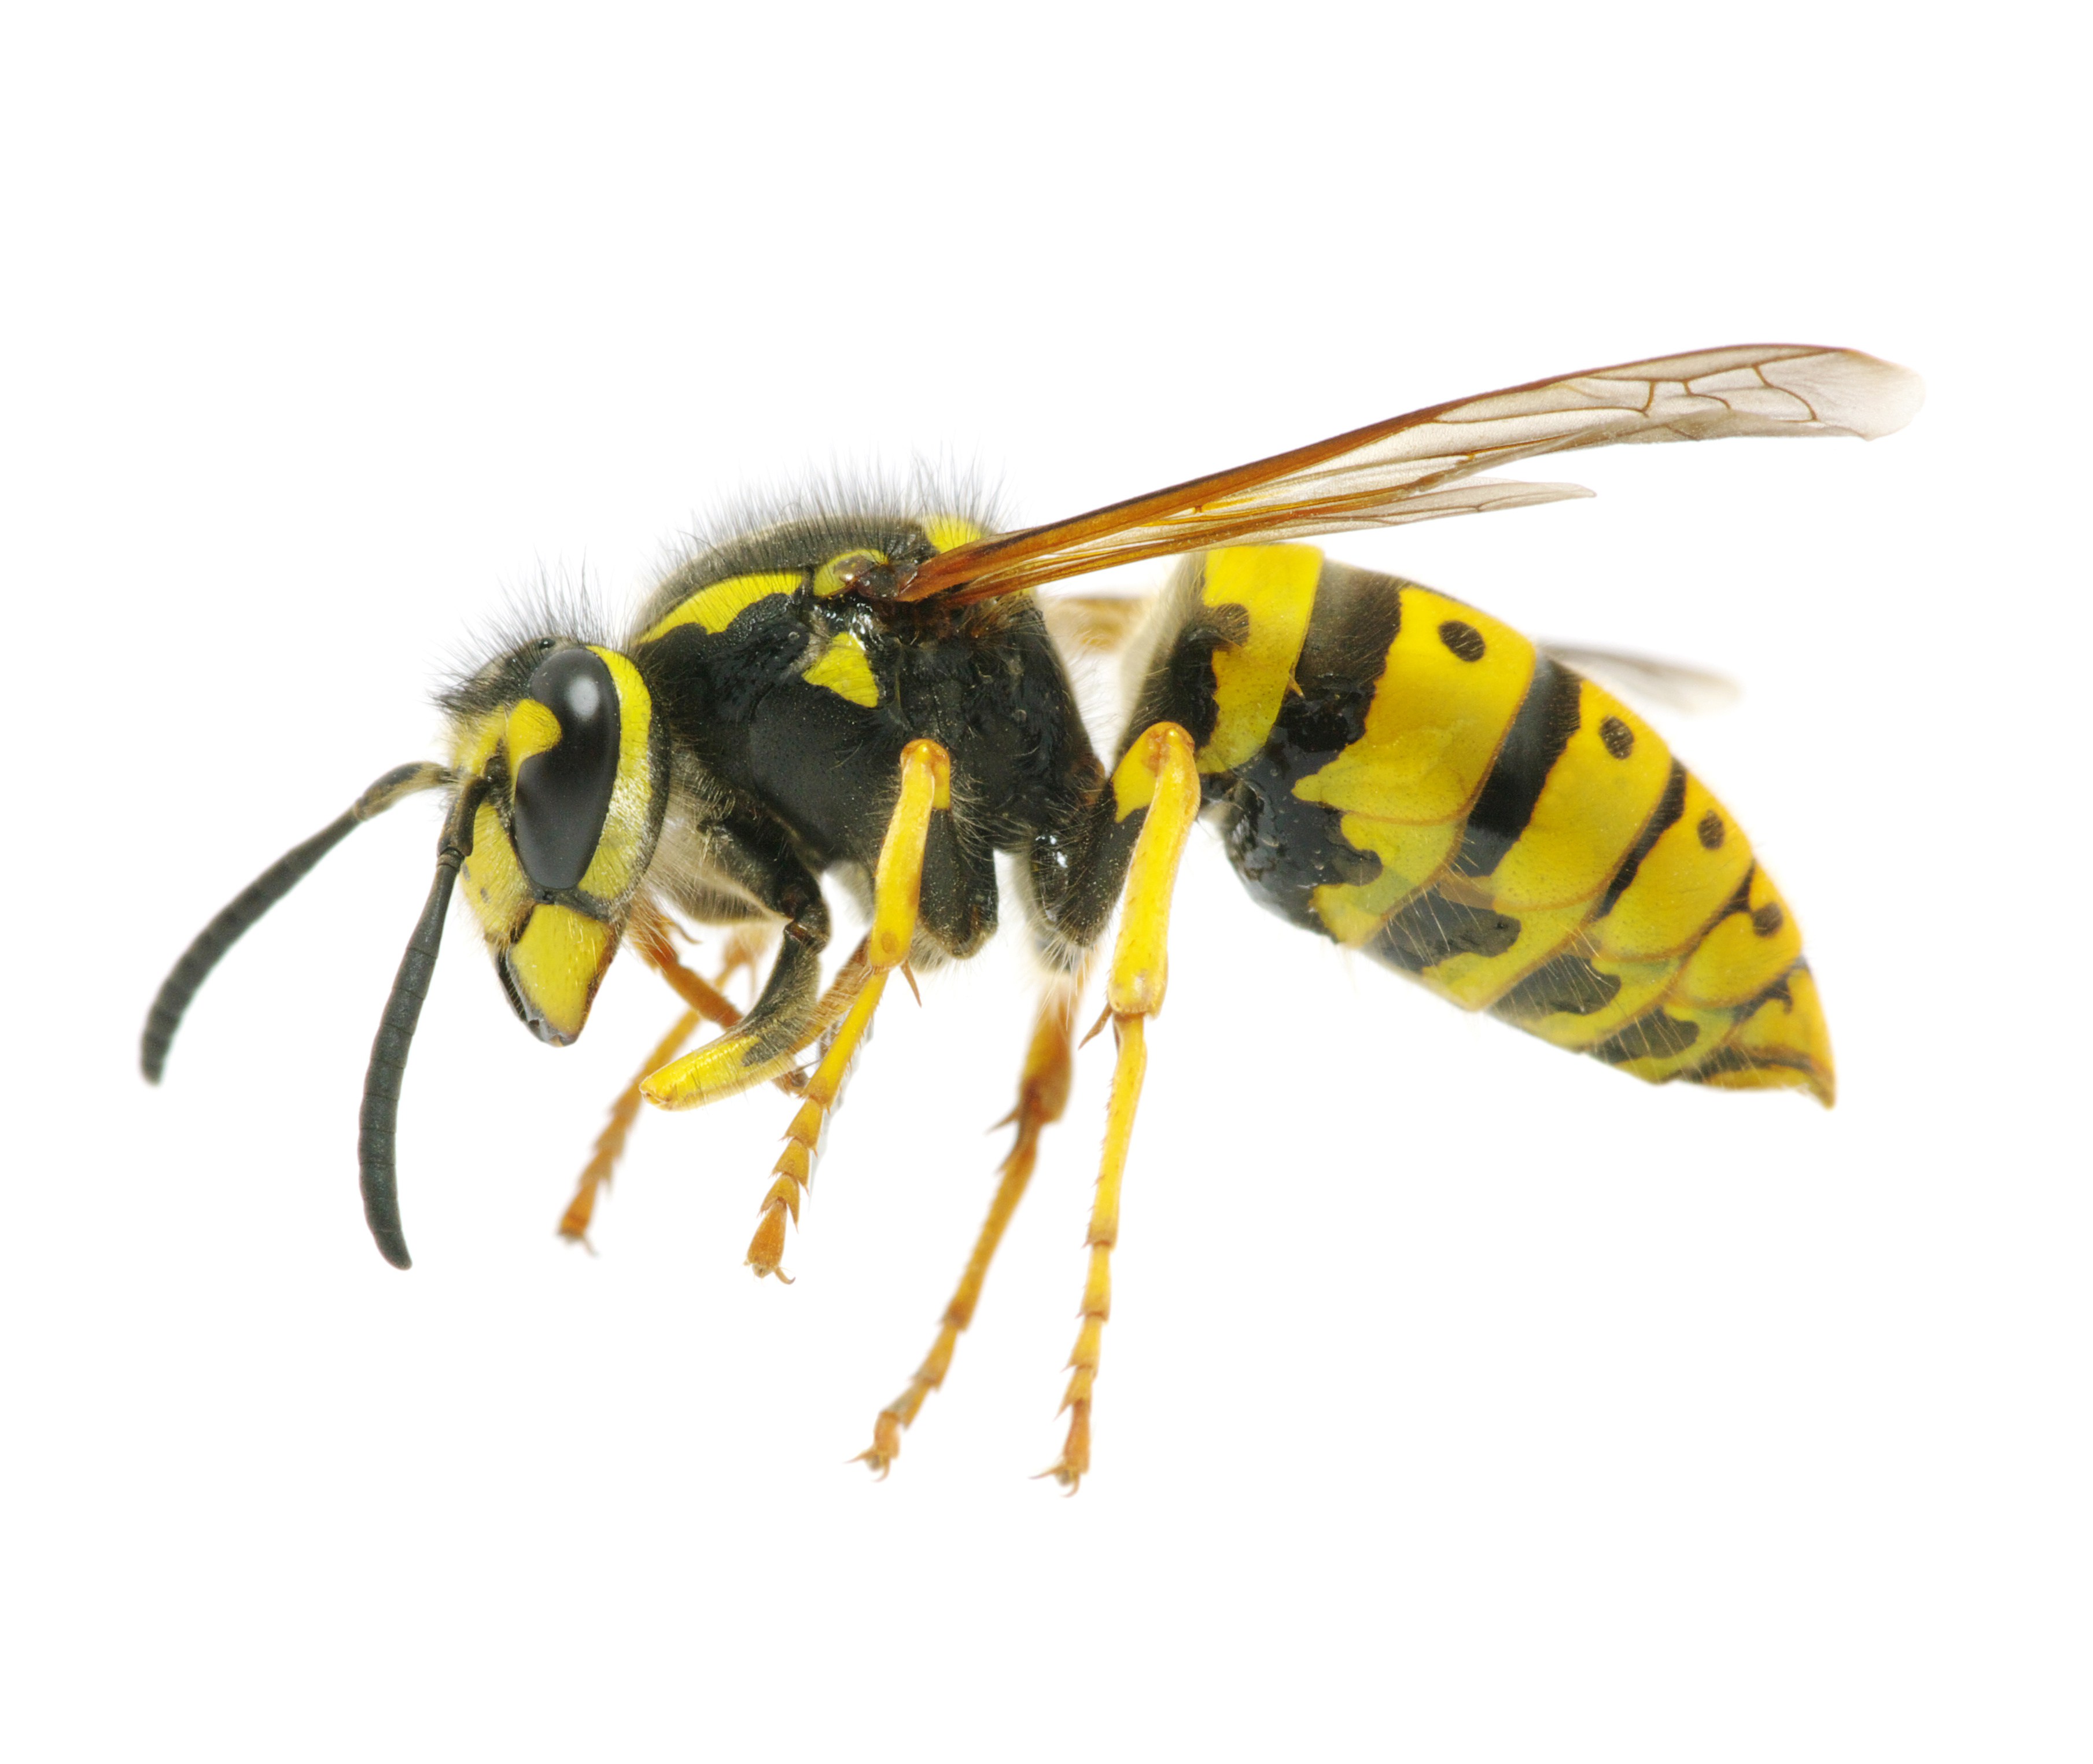 bees and wasps - AAI Pest Control serving Stockton CA